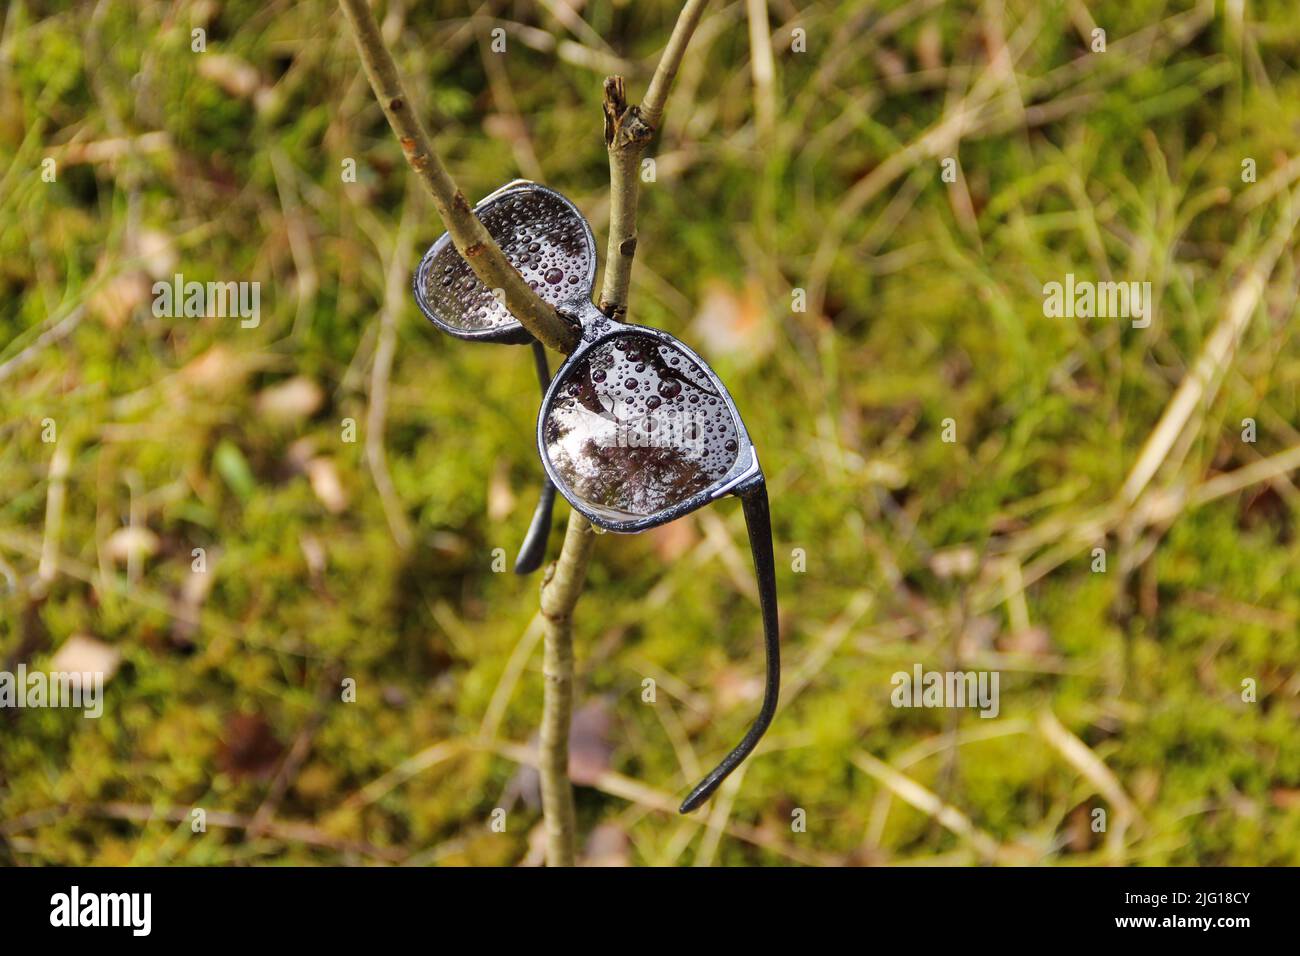 Lost sunglasses with water drops on the lenses. Stock Photo